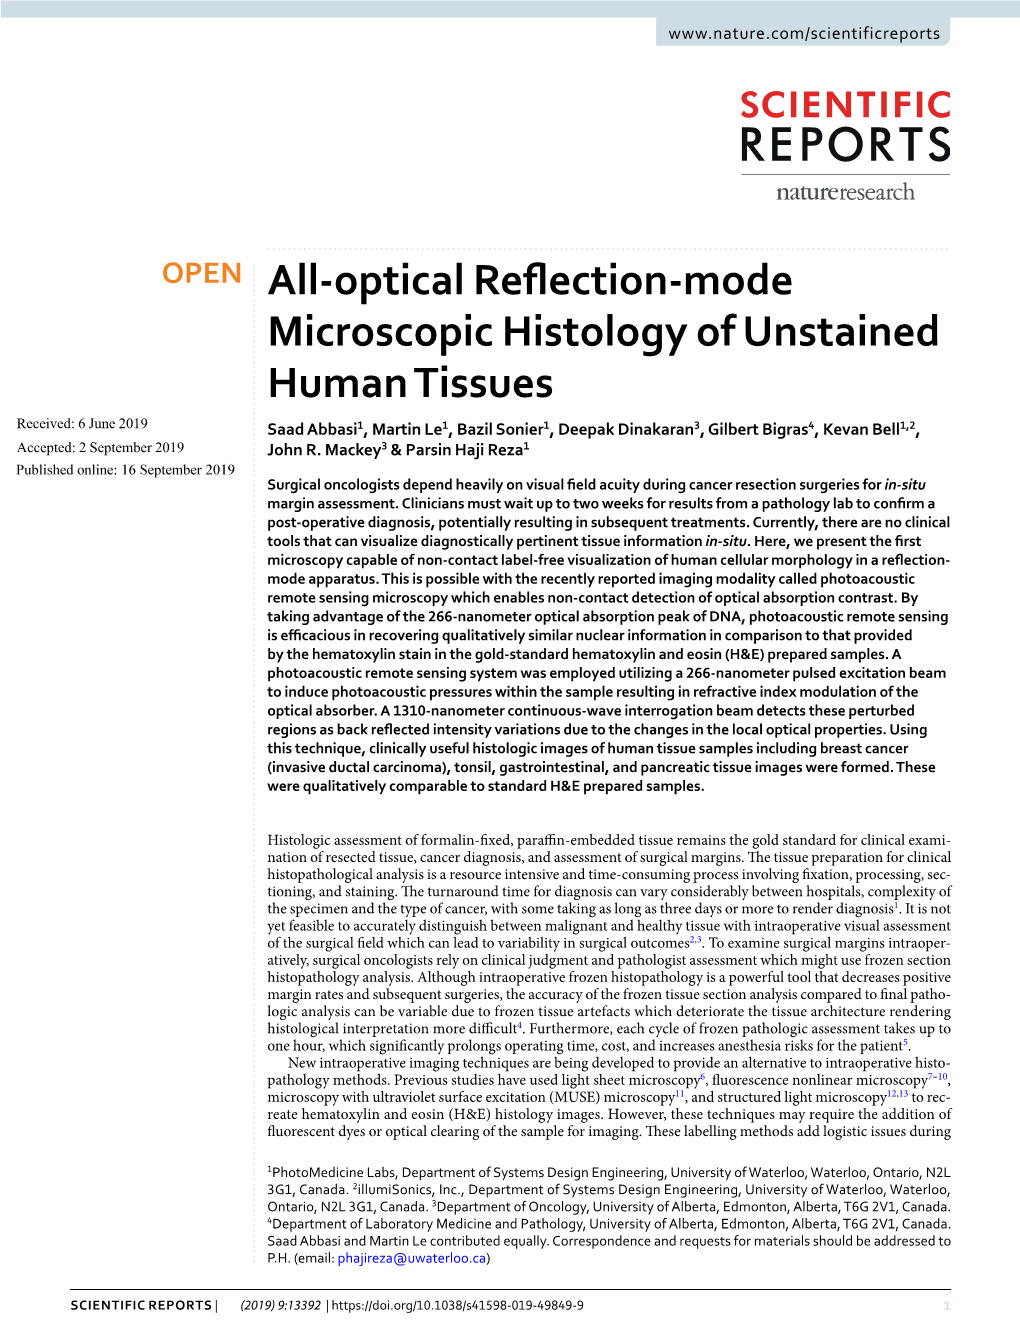 All-Optical Reflection-Mode Microscopic Histology of Unstained